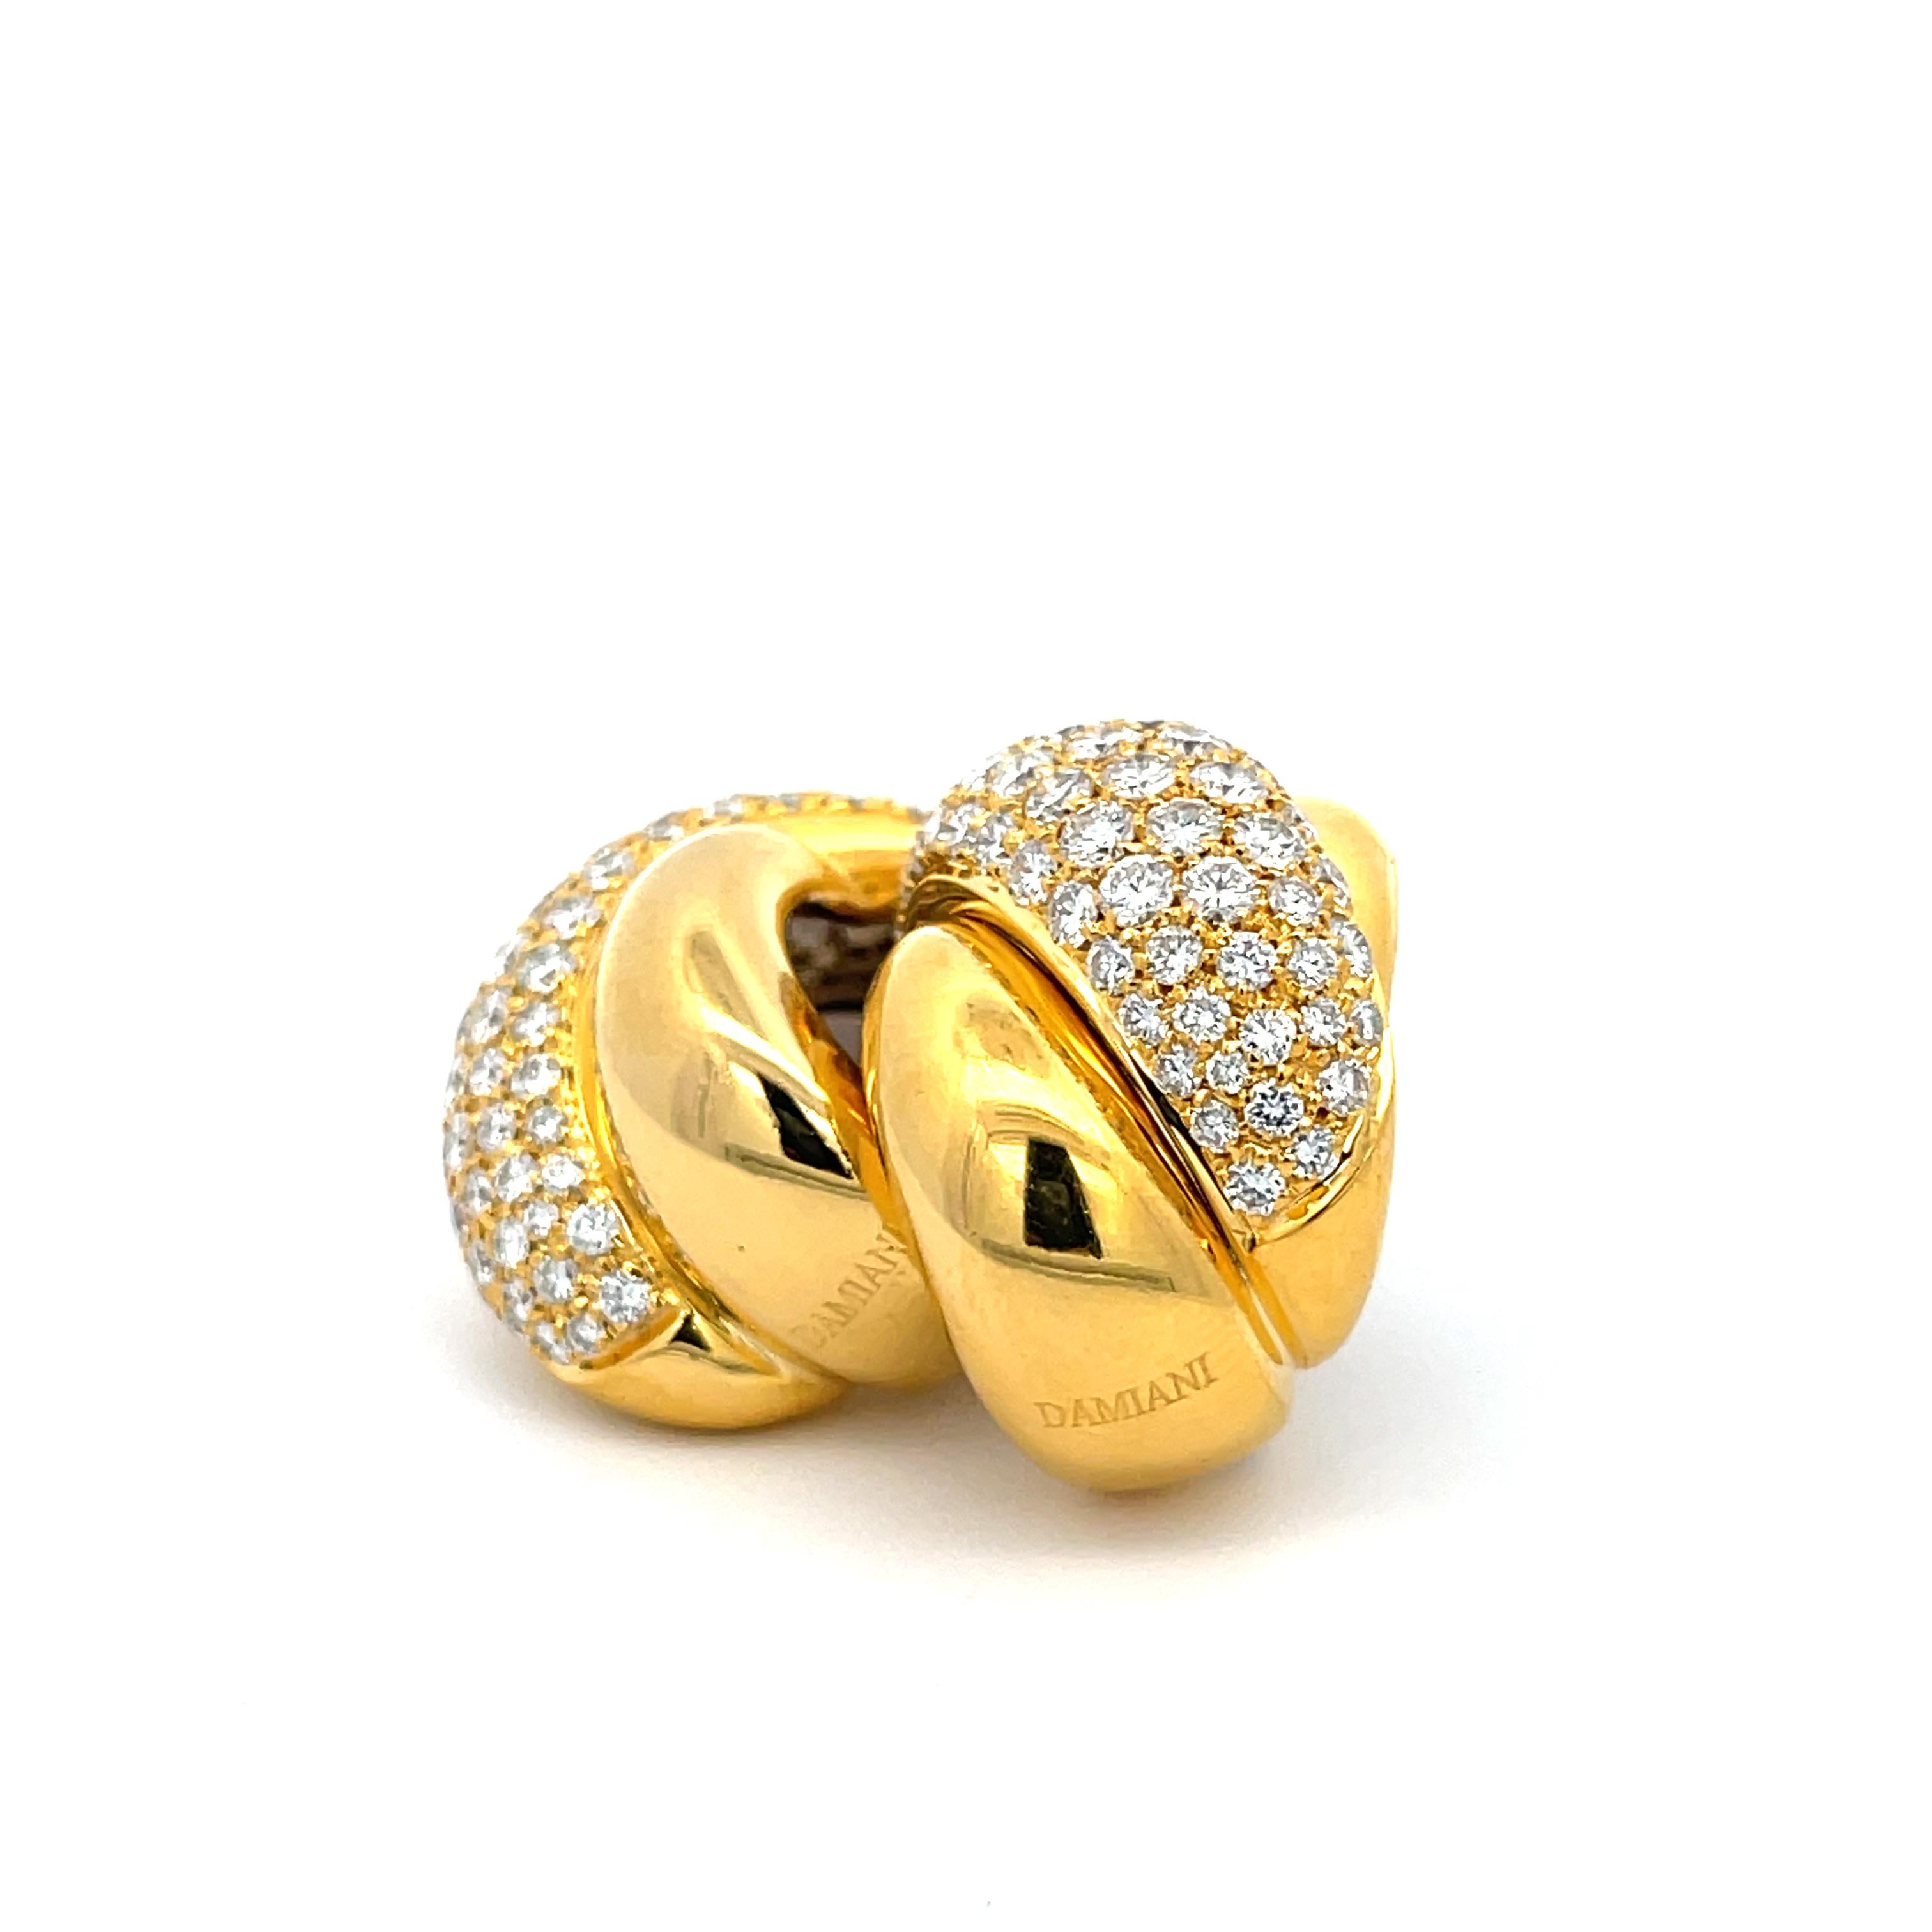 Damiani Pave Diamond Hoops in 18K Yellow Gold. The hoops feature 4.60ctw of brilliant round diamonds.
0.85